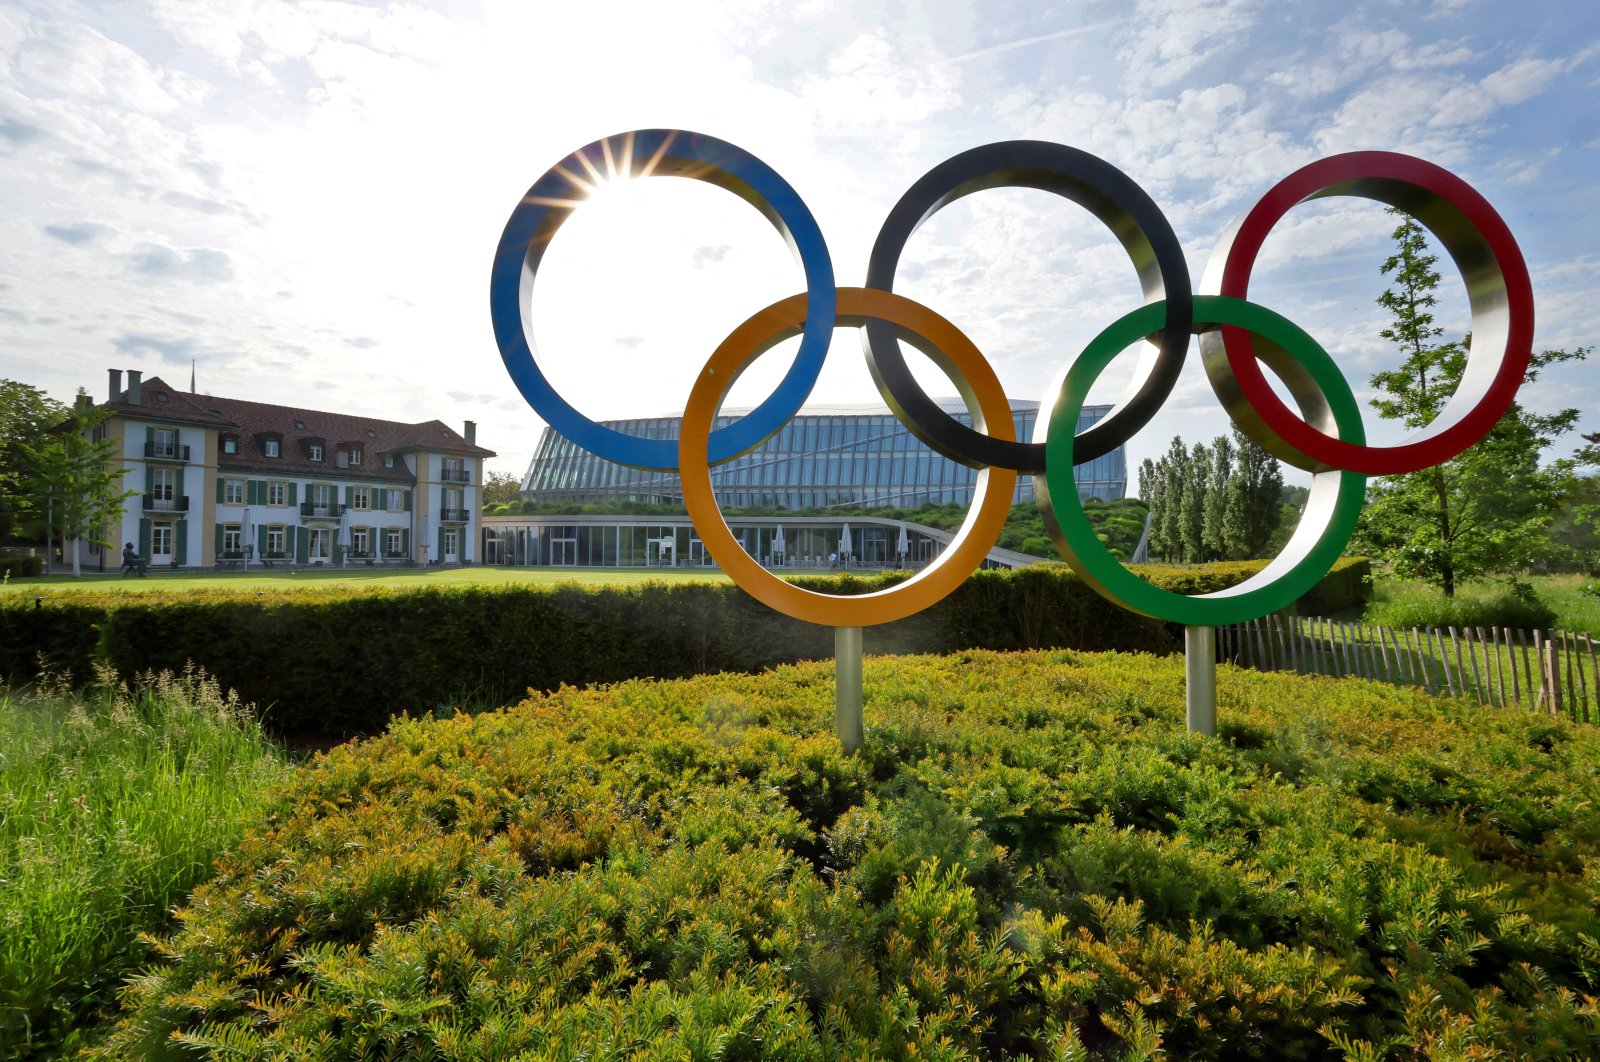 The Olympic rings are pictured in front of the International Olympic Committee (IOC) headquarters, Lausanne, Switzerland, May 17, 2022. (Reuters Photo)